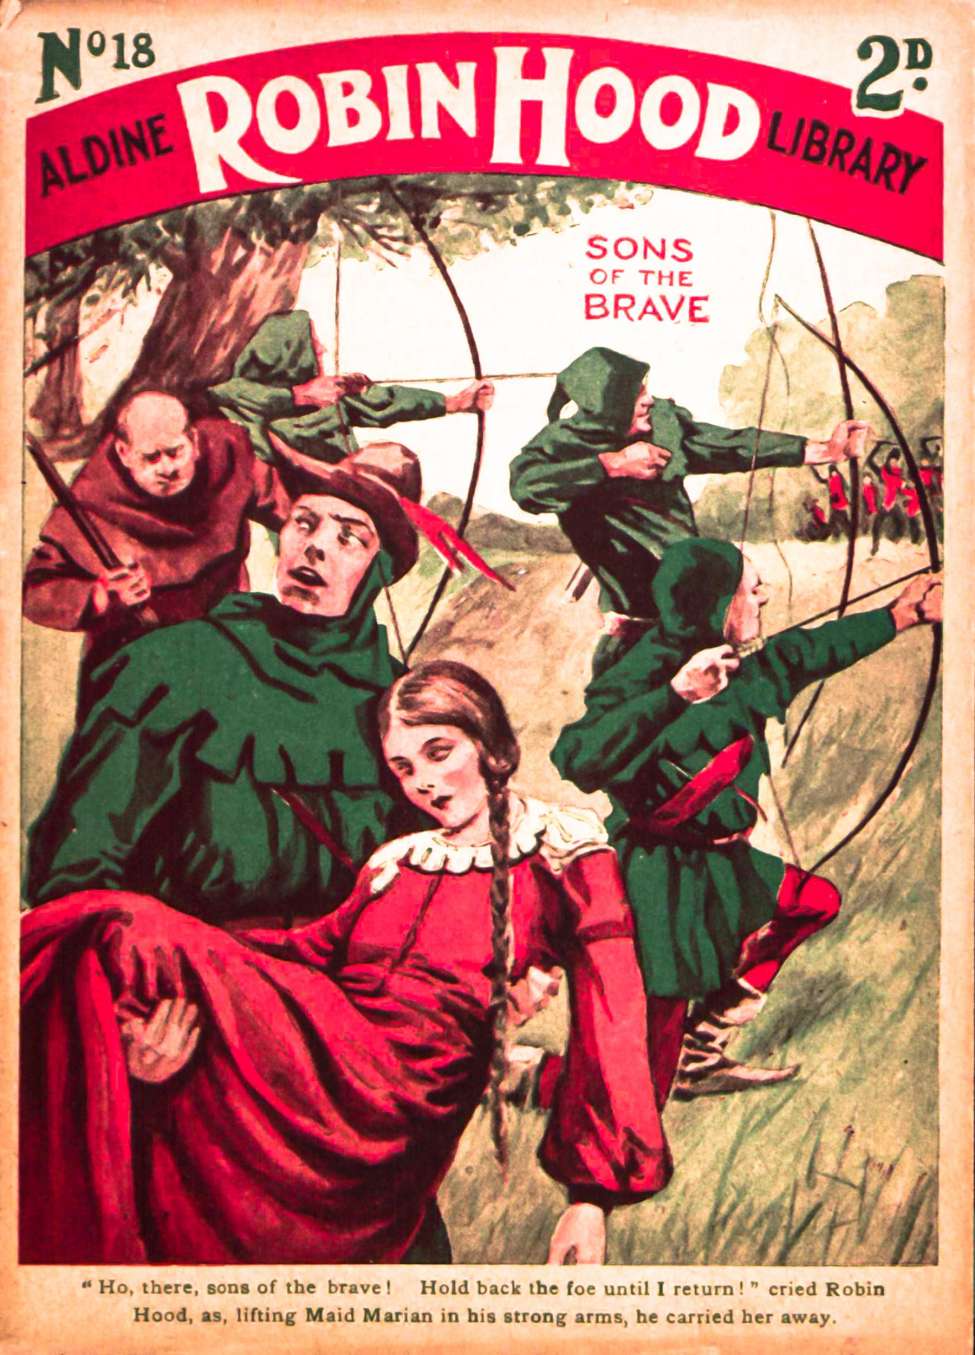 Book Cover For Aldine Robin Hood Library 18 - Sons of the Brave